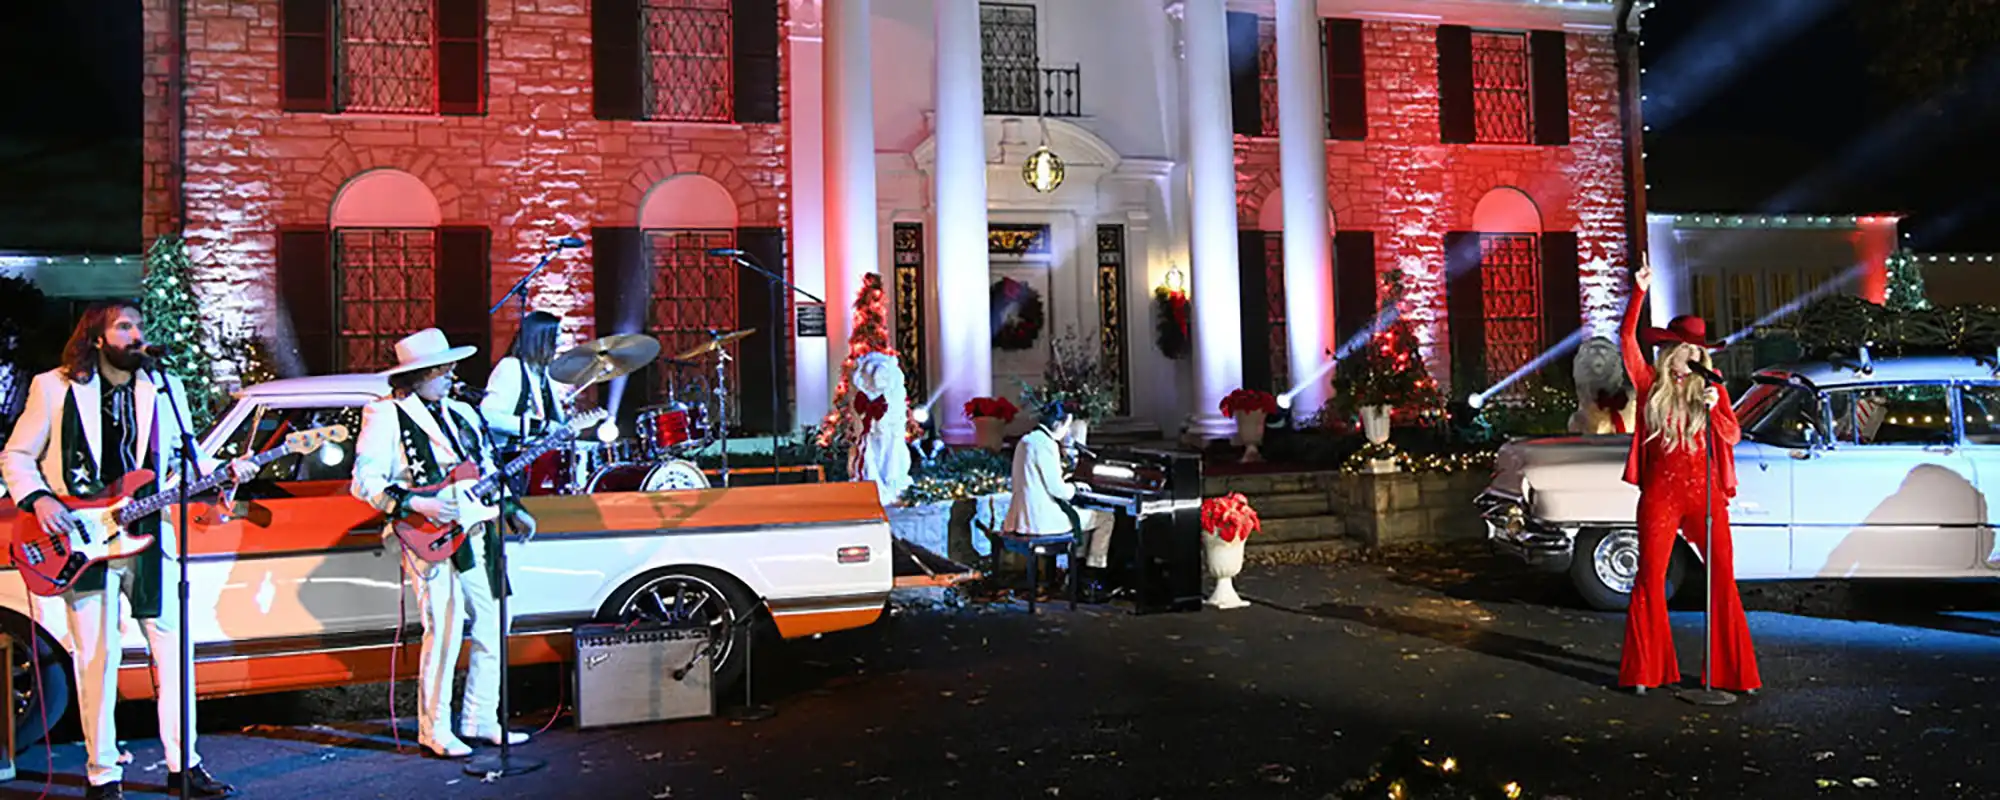 Post Malone, Lainey Wilson and More: Electrifying Moments from Christmas at Graceland